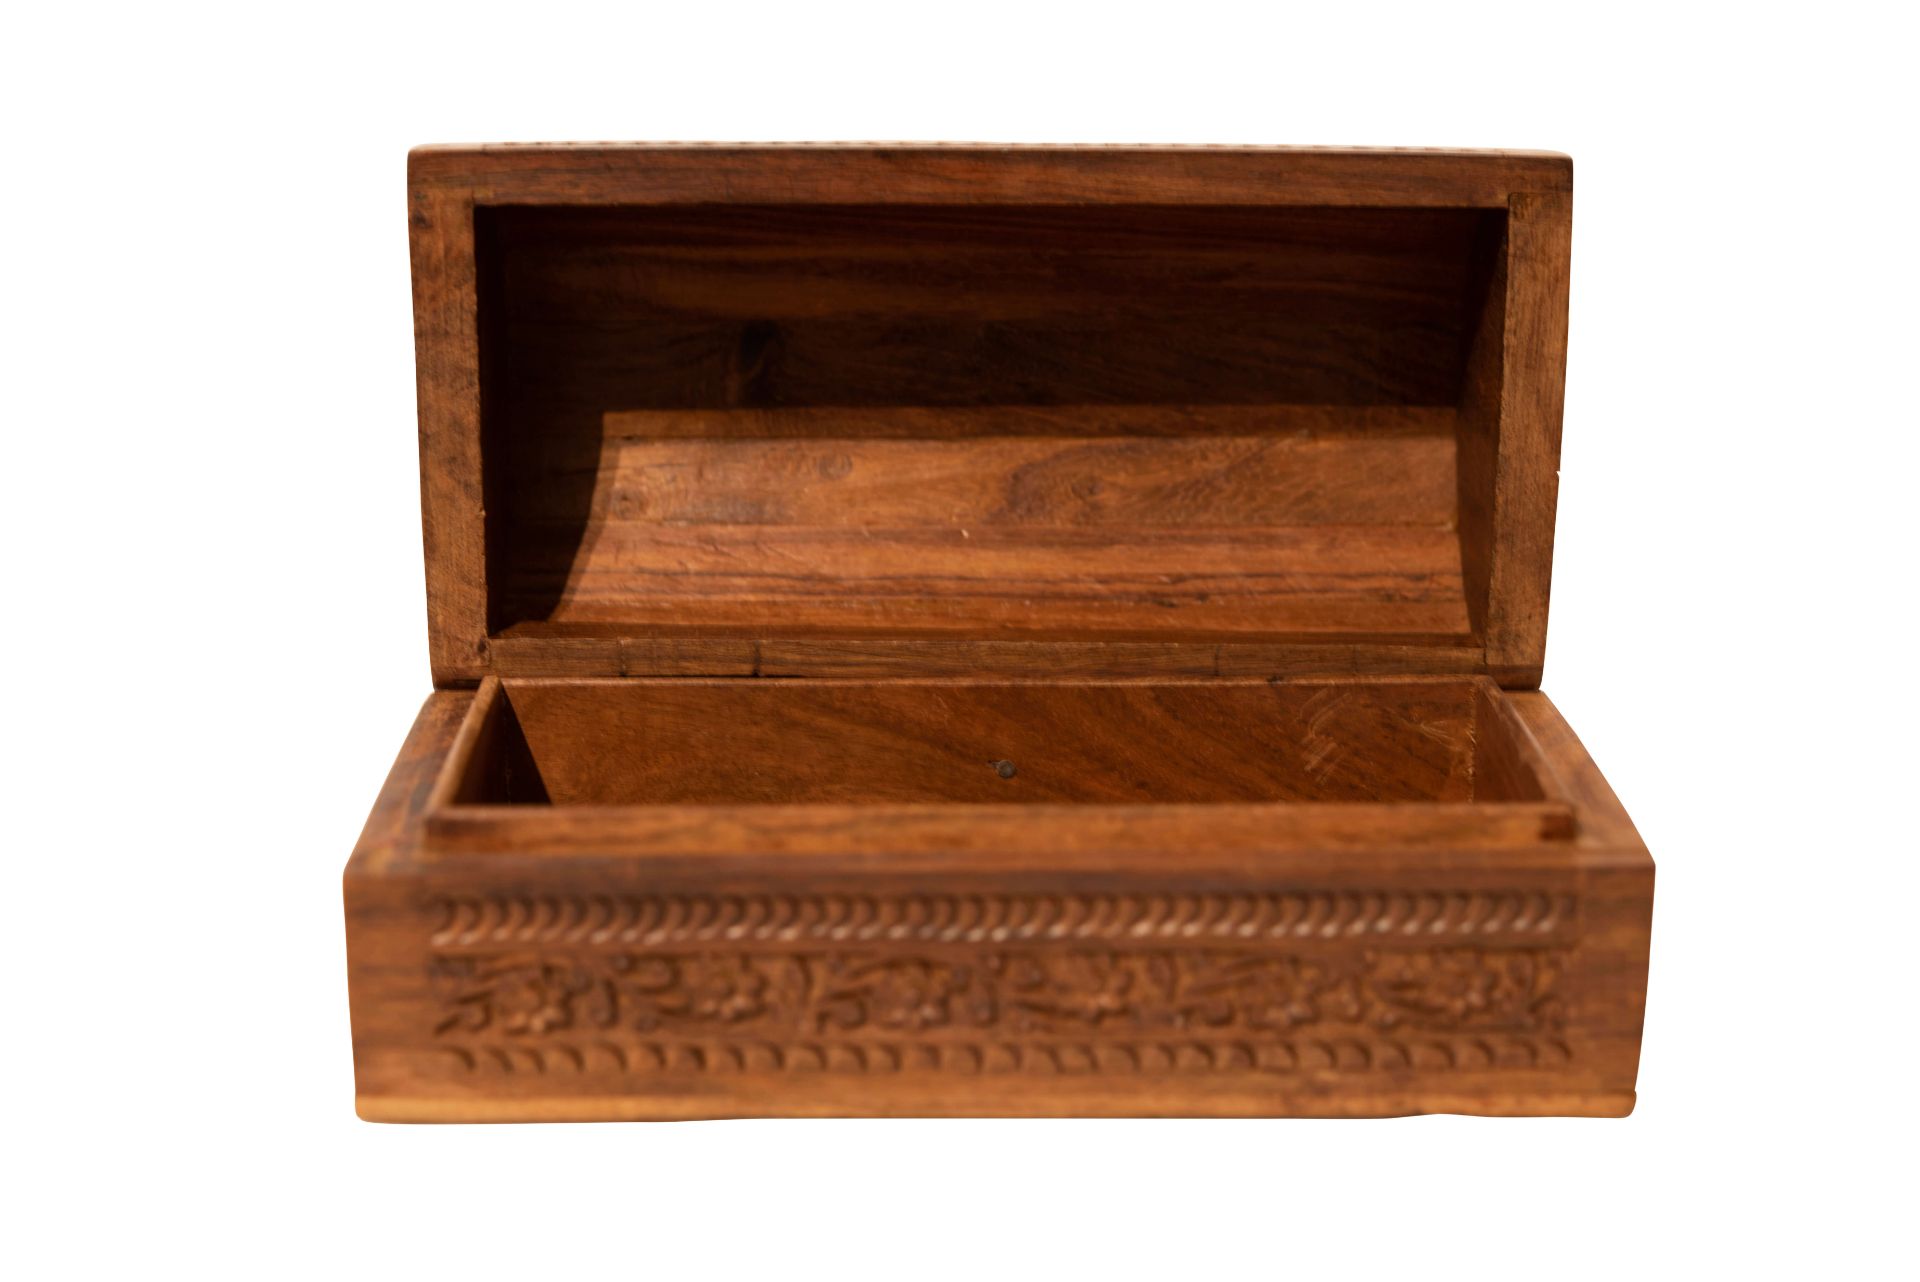 Holzkiste aus Rosenholz Asiatische Schnitzmotive | Rosewood Box with Carved Asian Motifs - Image 2 of 5